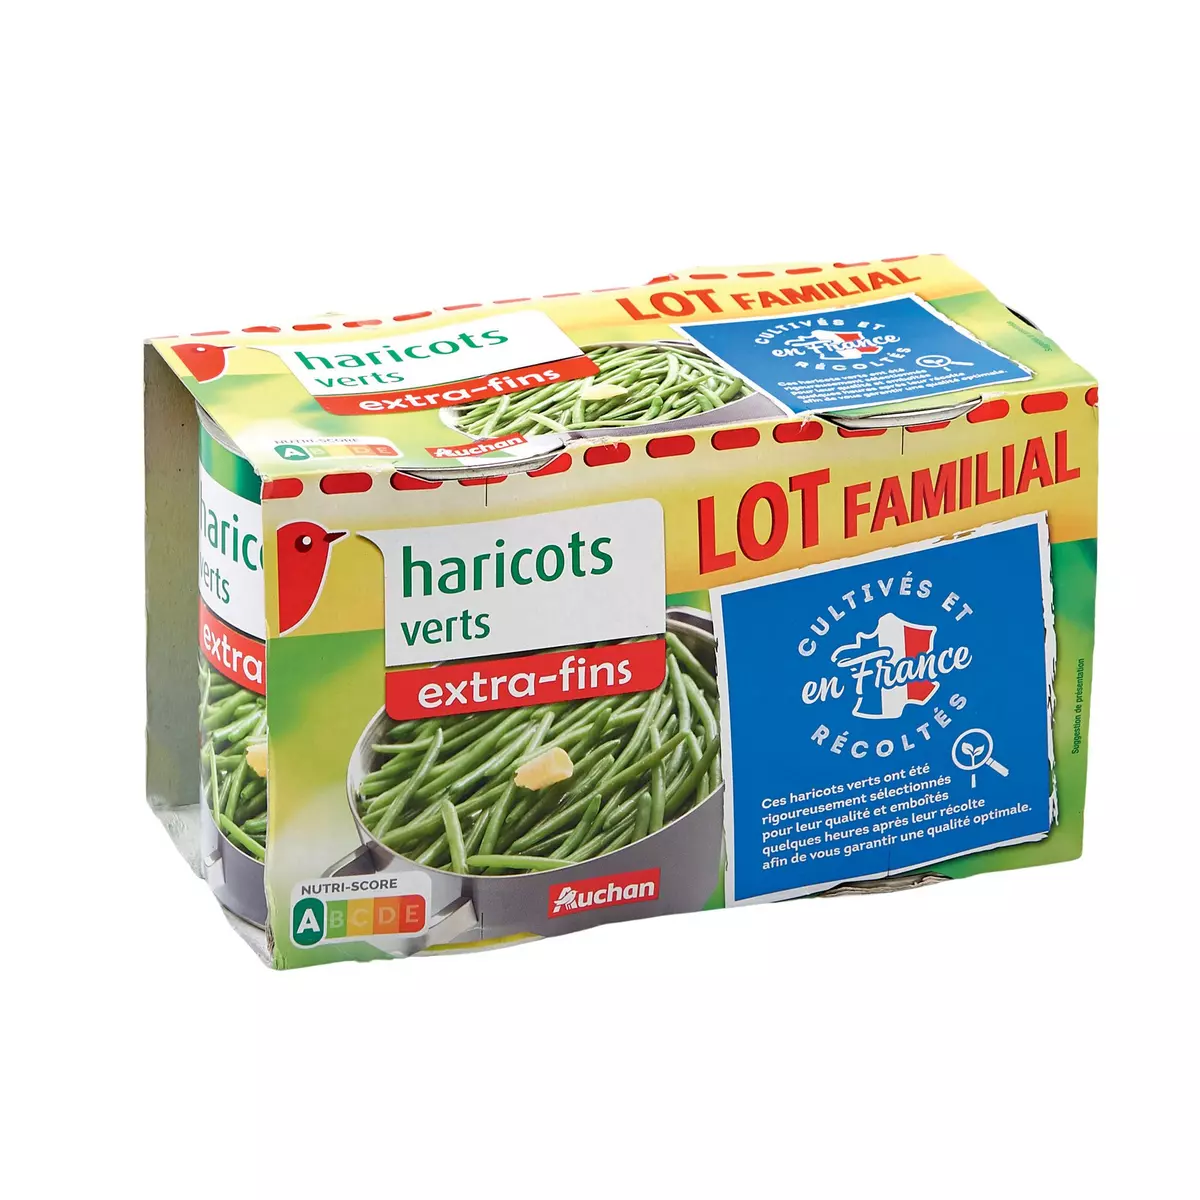 AUCHAN Haricots verts extra fins 2 conserves 2x440g